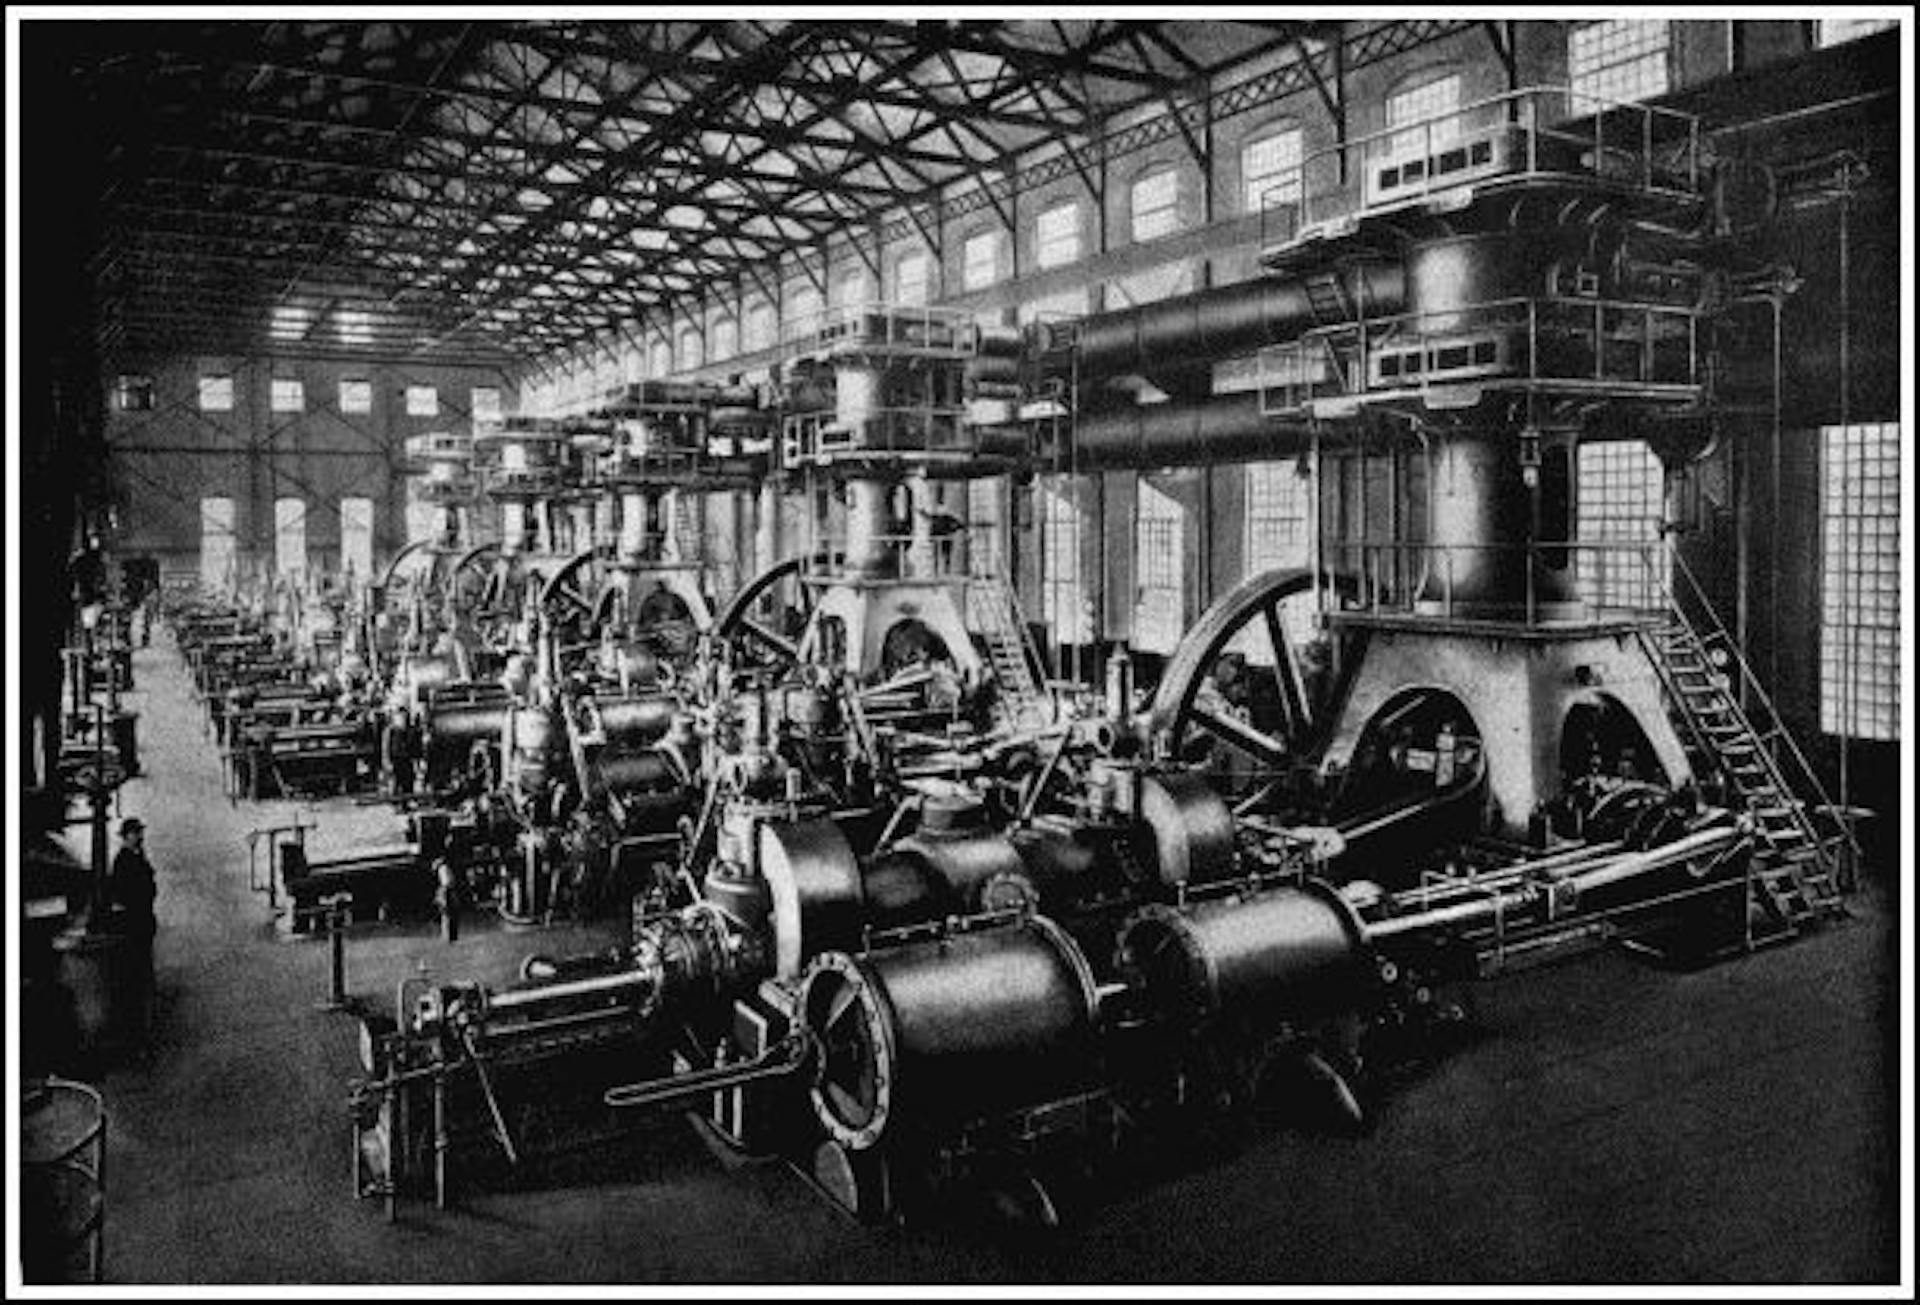 GIGANTIC GAS ENGINES
Five of sixteen 2,000 h.p. Körting Gas Engines built by the De la Vergne Company of New York City for blowing the blast furnaces of the Lackawanna Steel Company. The gas-engine plant at these works is the largest in the world. Notice the man to the left.